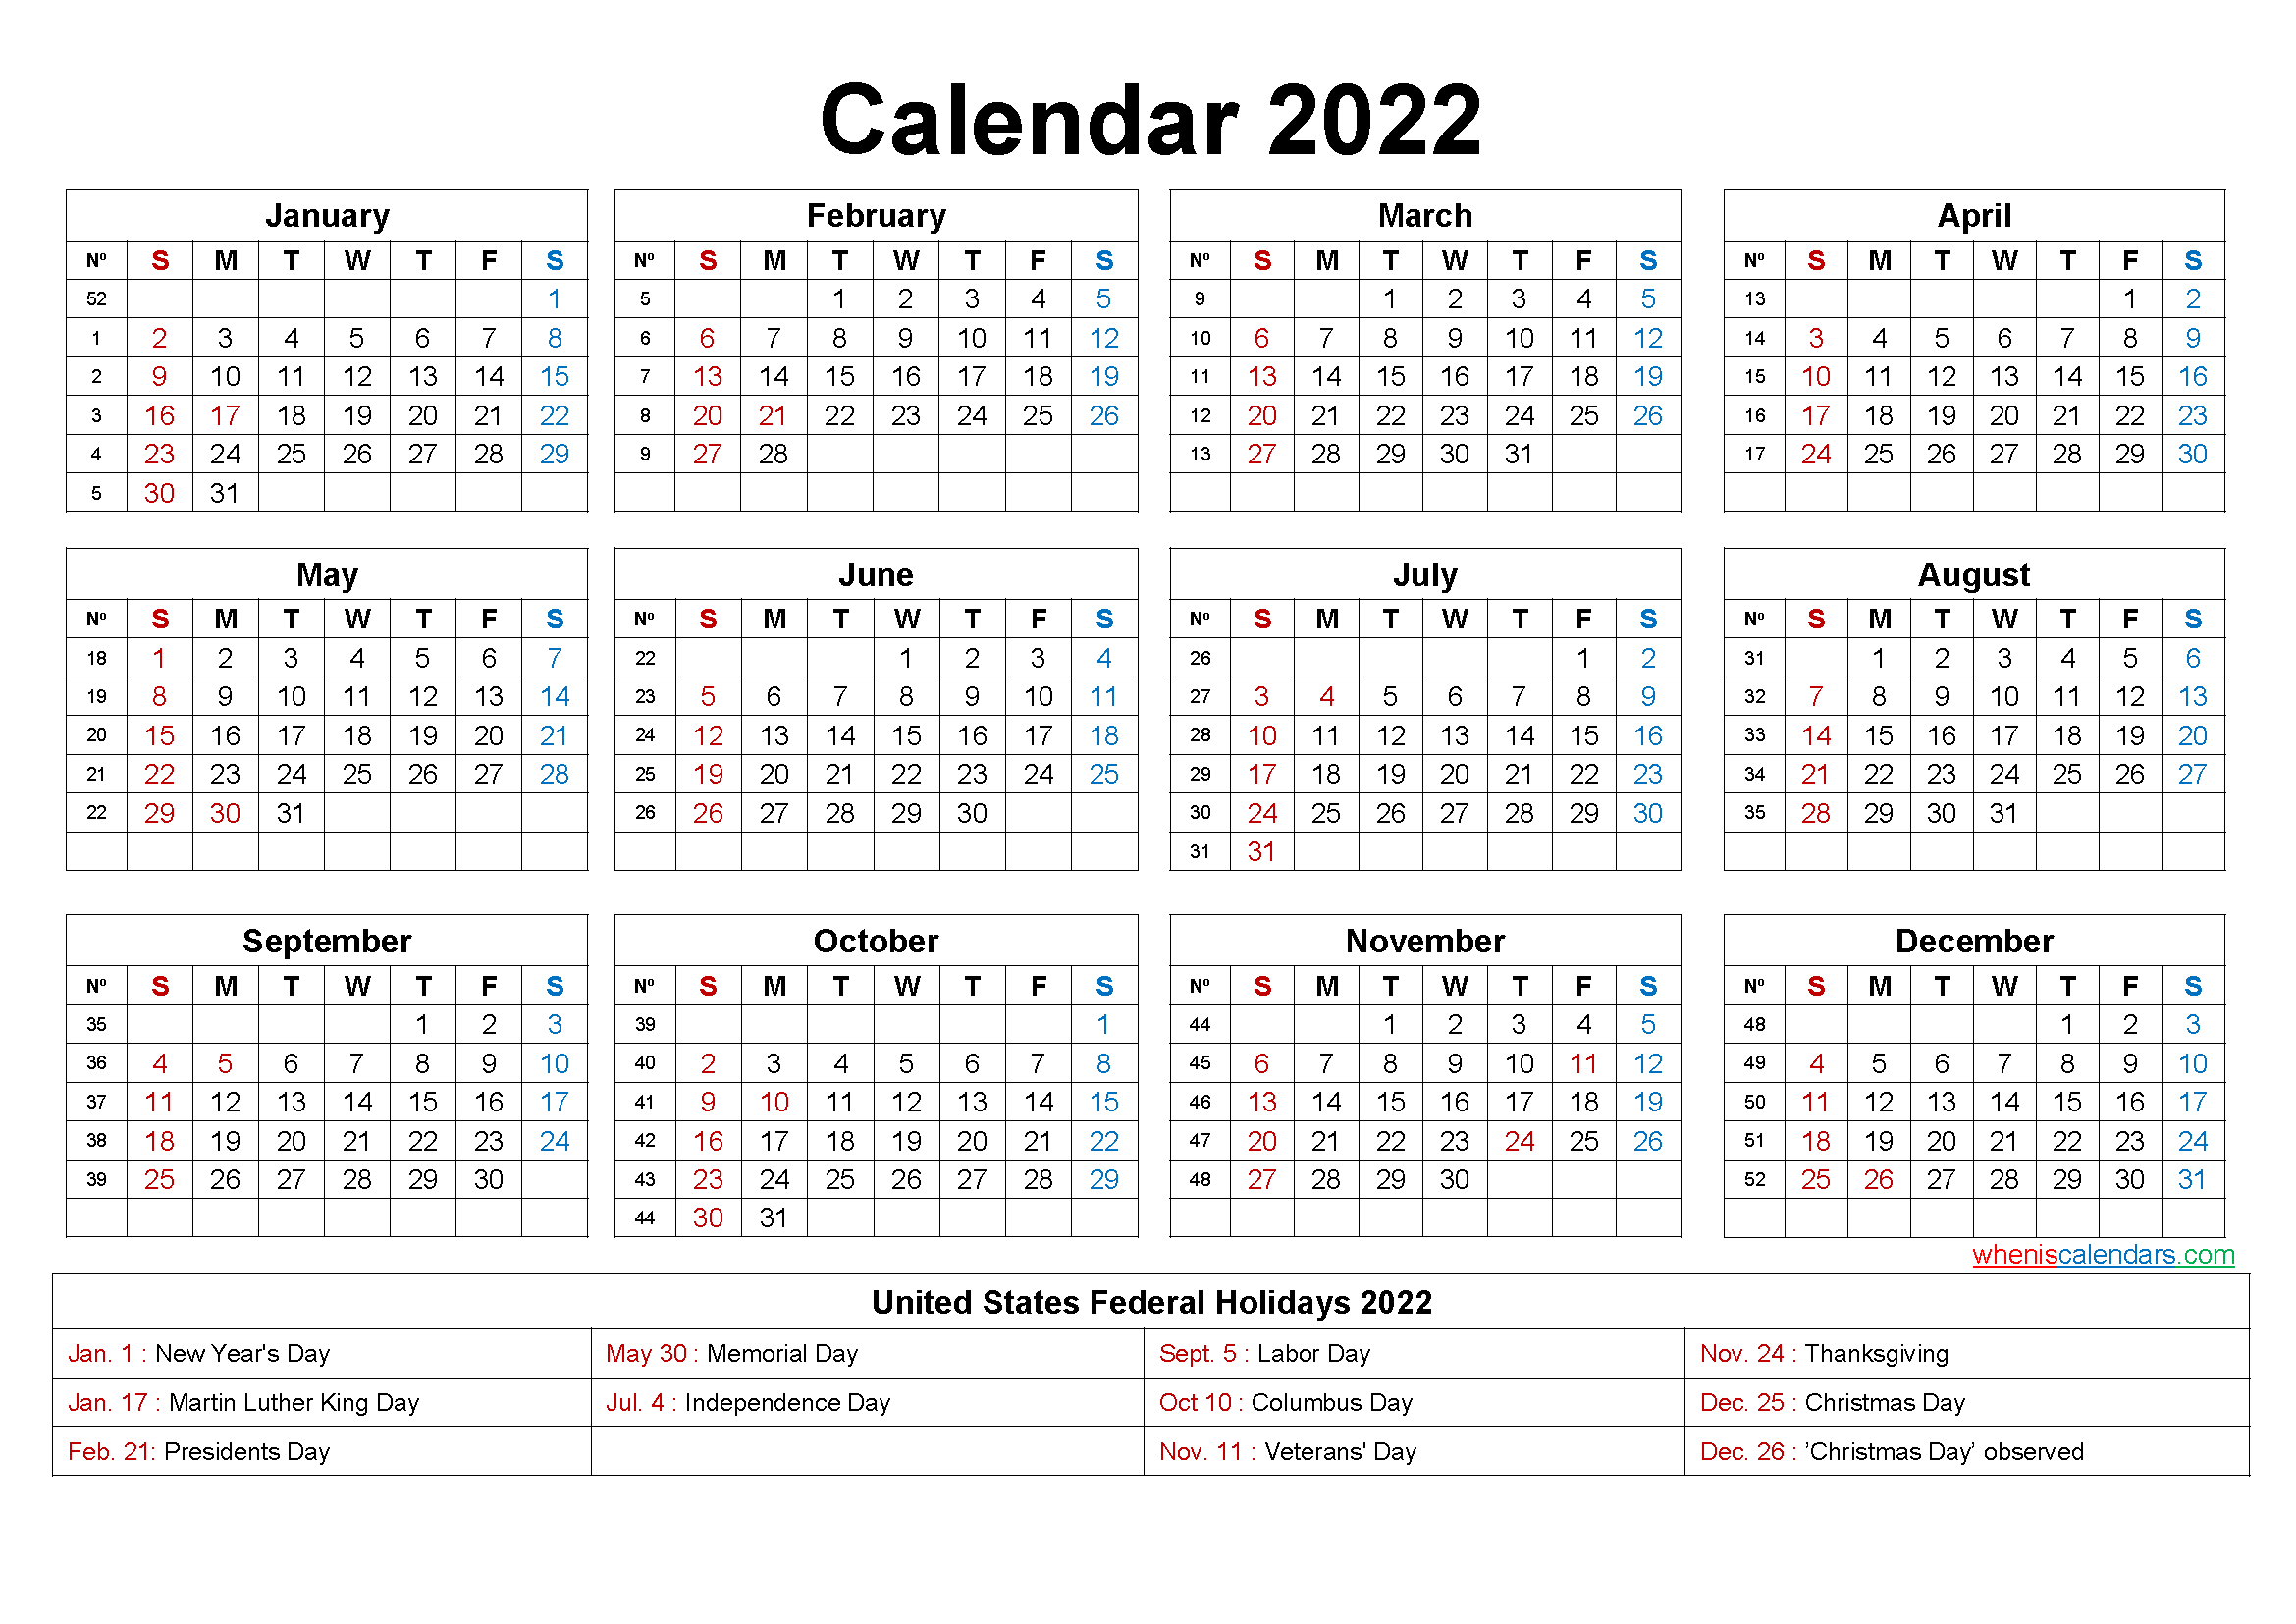 changing-month-and-year-microsoft-word-calendar-yearlycalendars